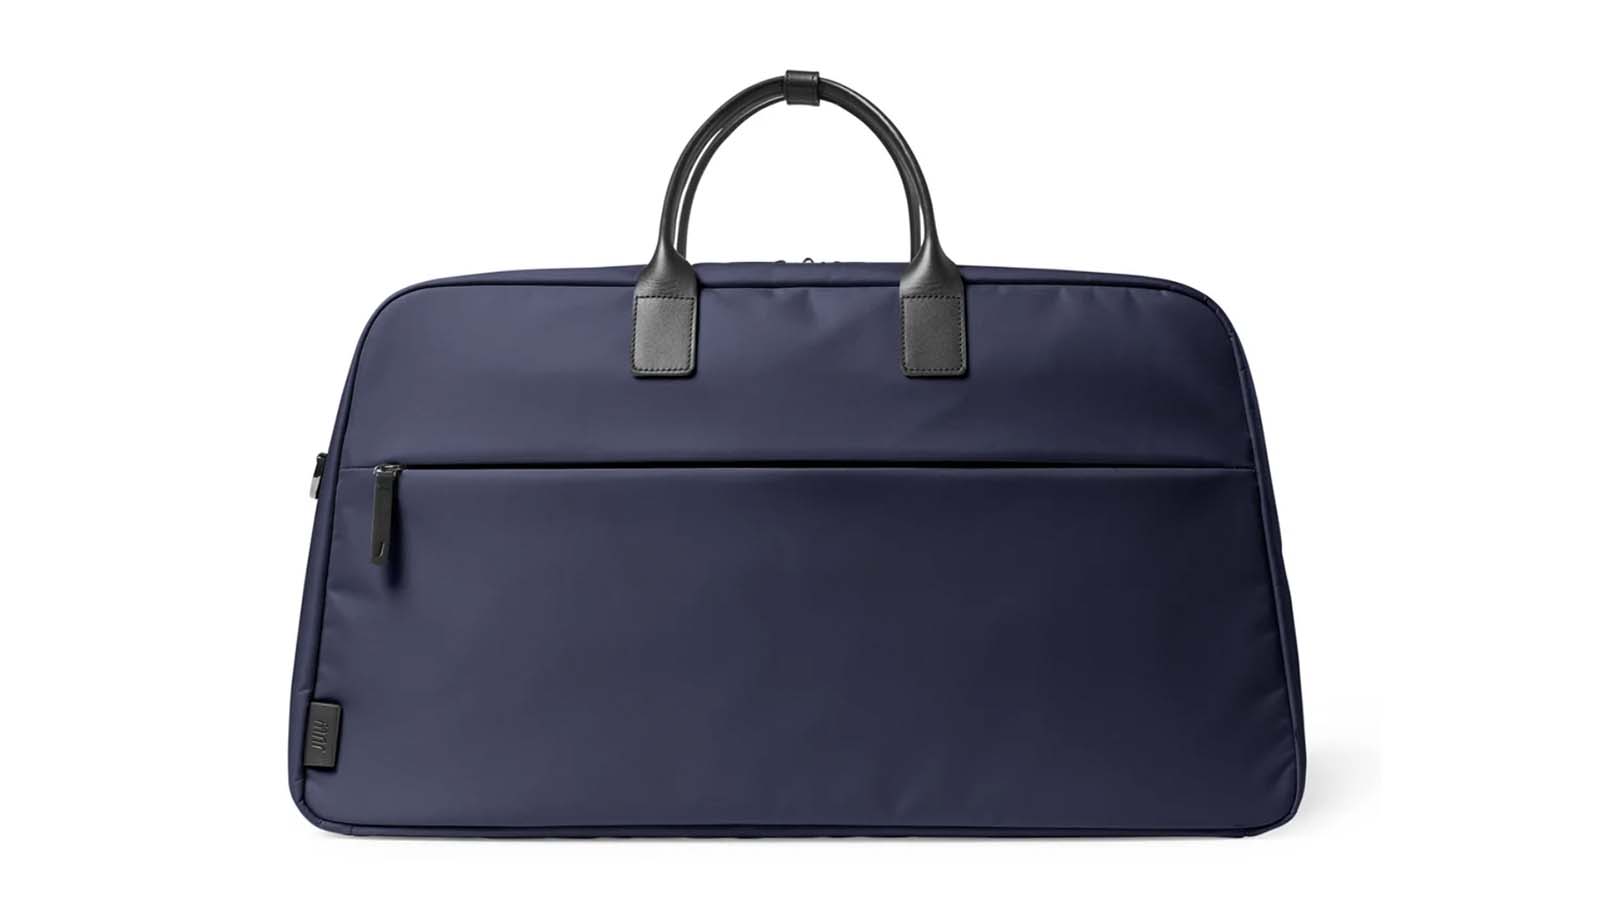 DKNY Rapture Luggage Collection - Macy's  Luggage sets cute, Luggage bags  travel, Stylish luggage